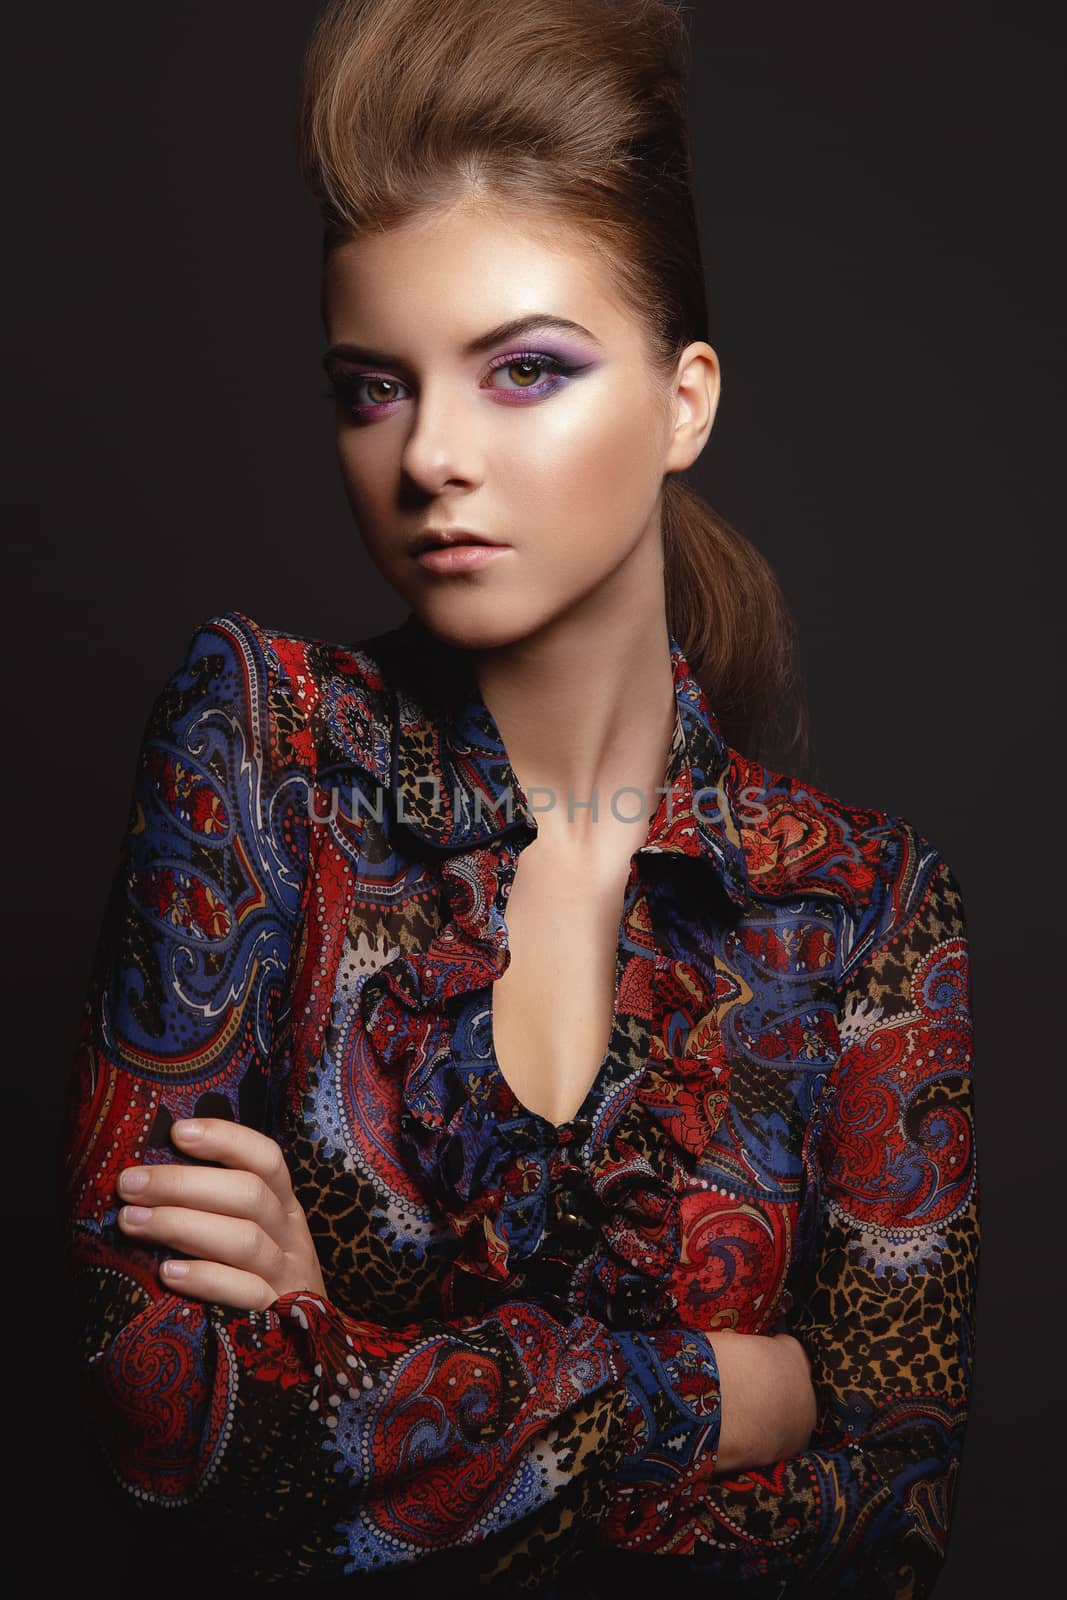 Studio Portrait of a beautiful young model girl with glamorous evening makeup